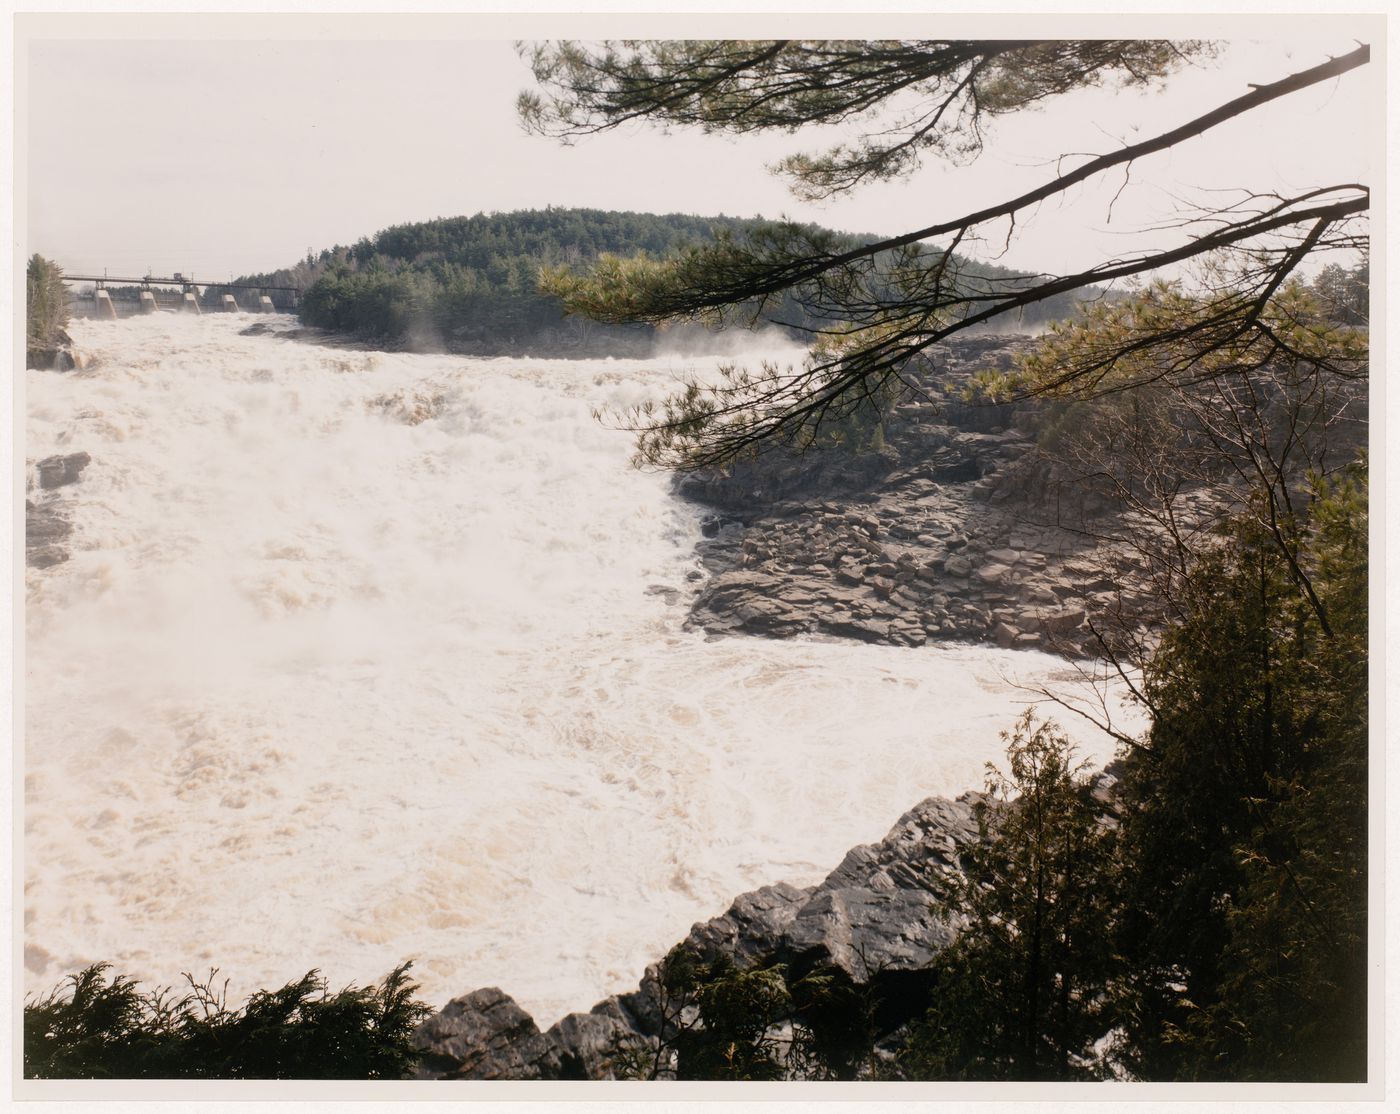 Section 2 of 2 of Panorama of Shawinigan Falls, looking north, showing gorge, Shawinigan 3 power station, Canadian Pacific bridge, spillway, and Melville Island